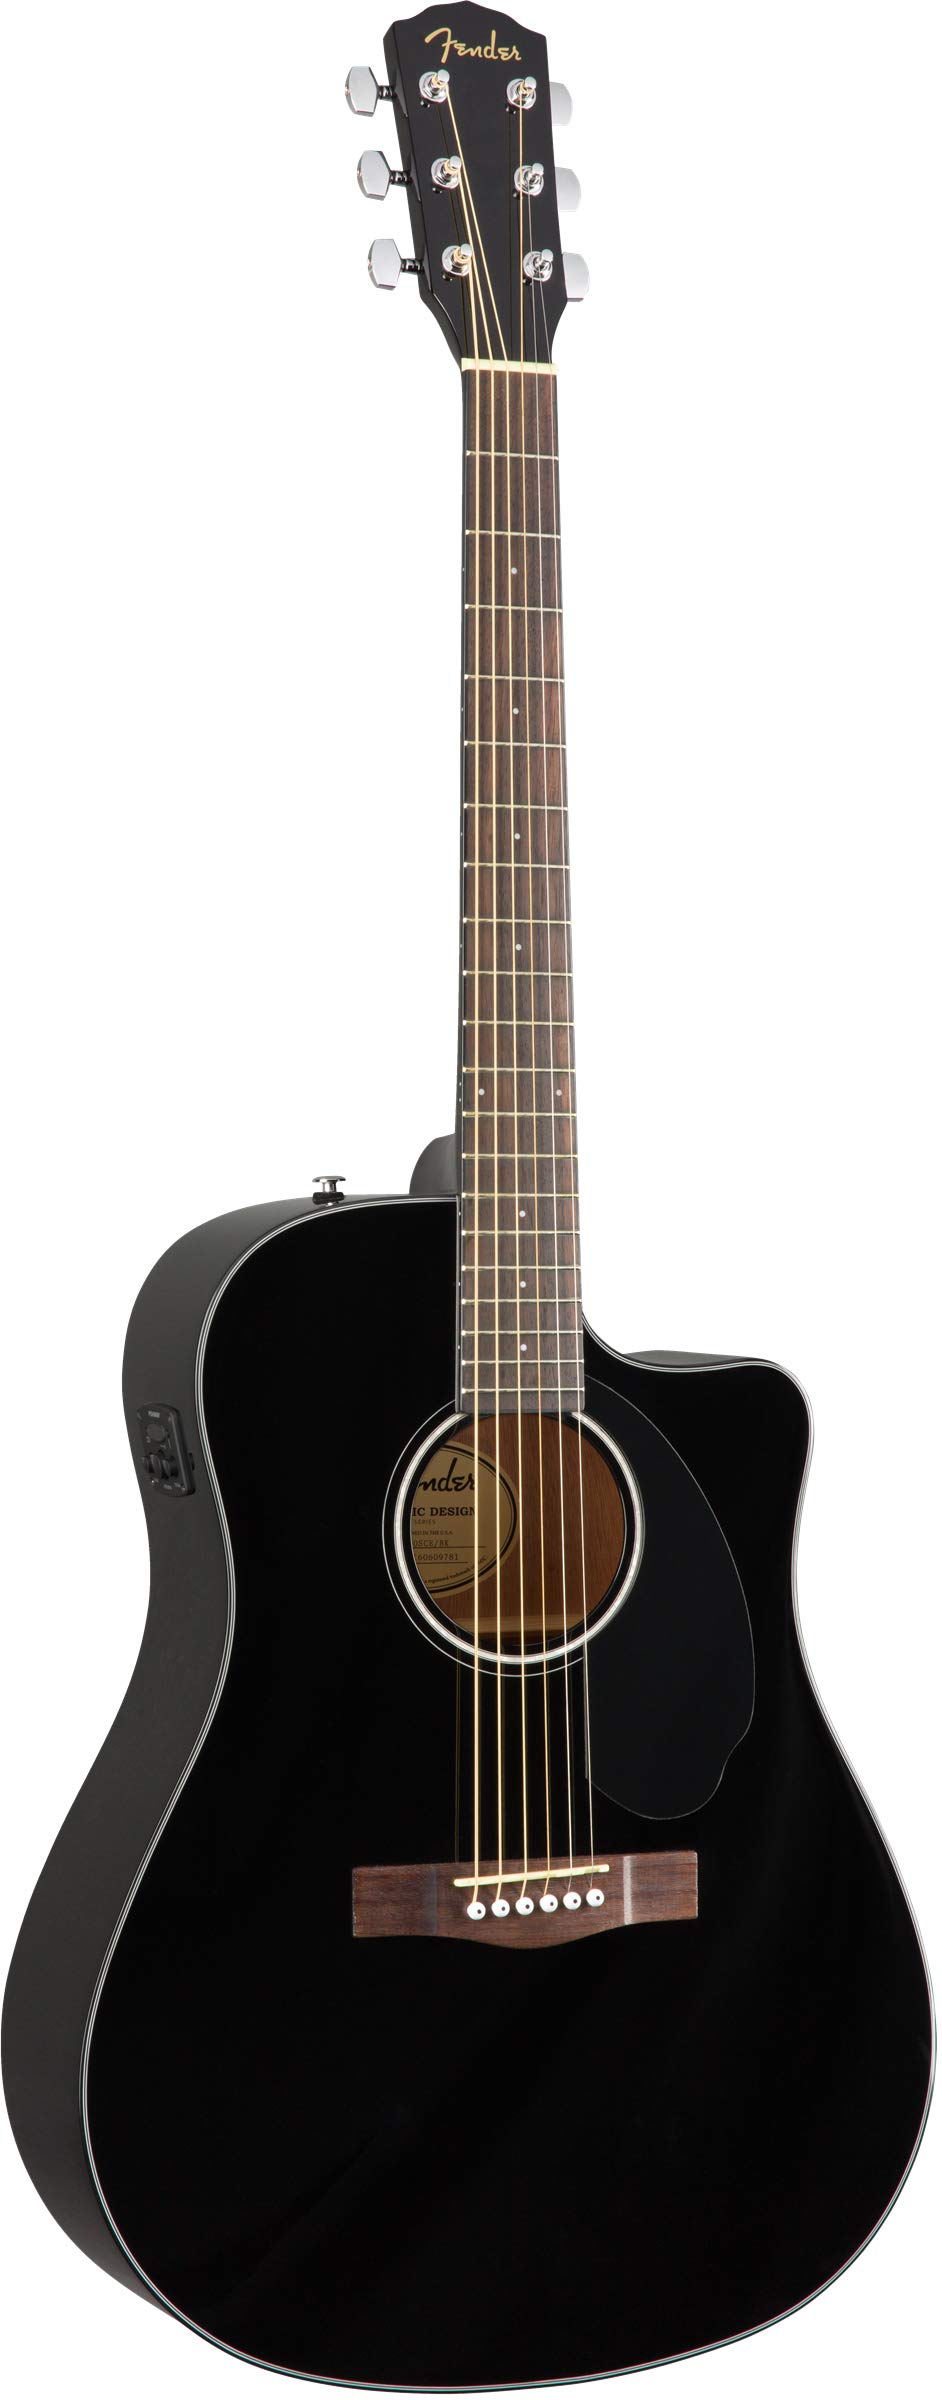 Fender CD-60SCE Solid Top Dreadnought Acoustic-Electric Guitar - Black Bundle with Hard Case, Instrument Cable, Tuner, Strap, Strings, Picks, and Austin Bazaar Instructional DVD